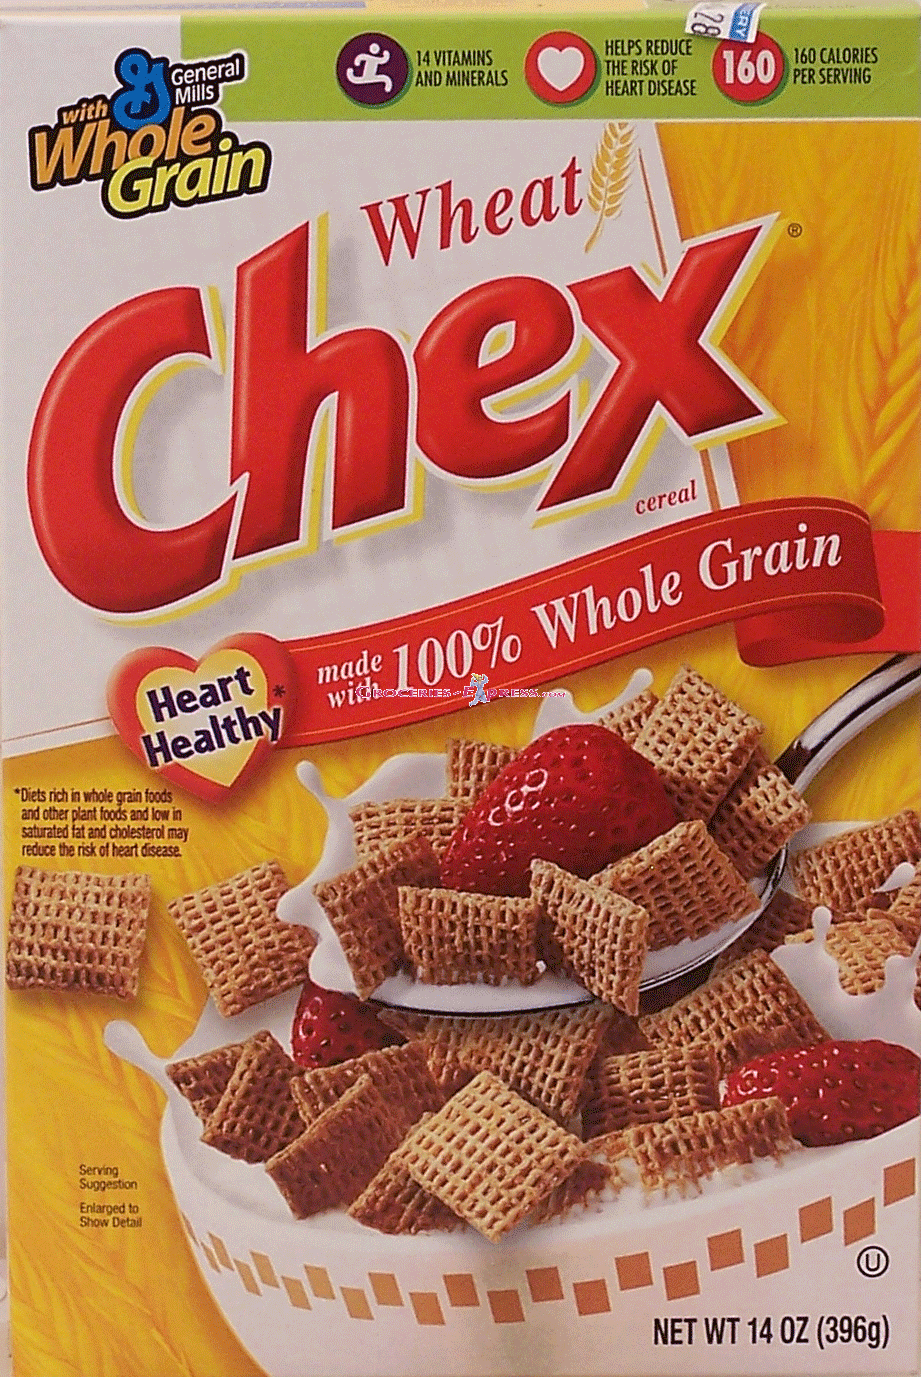 General Mills Wheat Chex breakfast cereal made with 100% whole grain Full-Size Picture